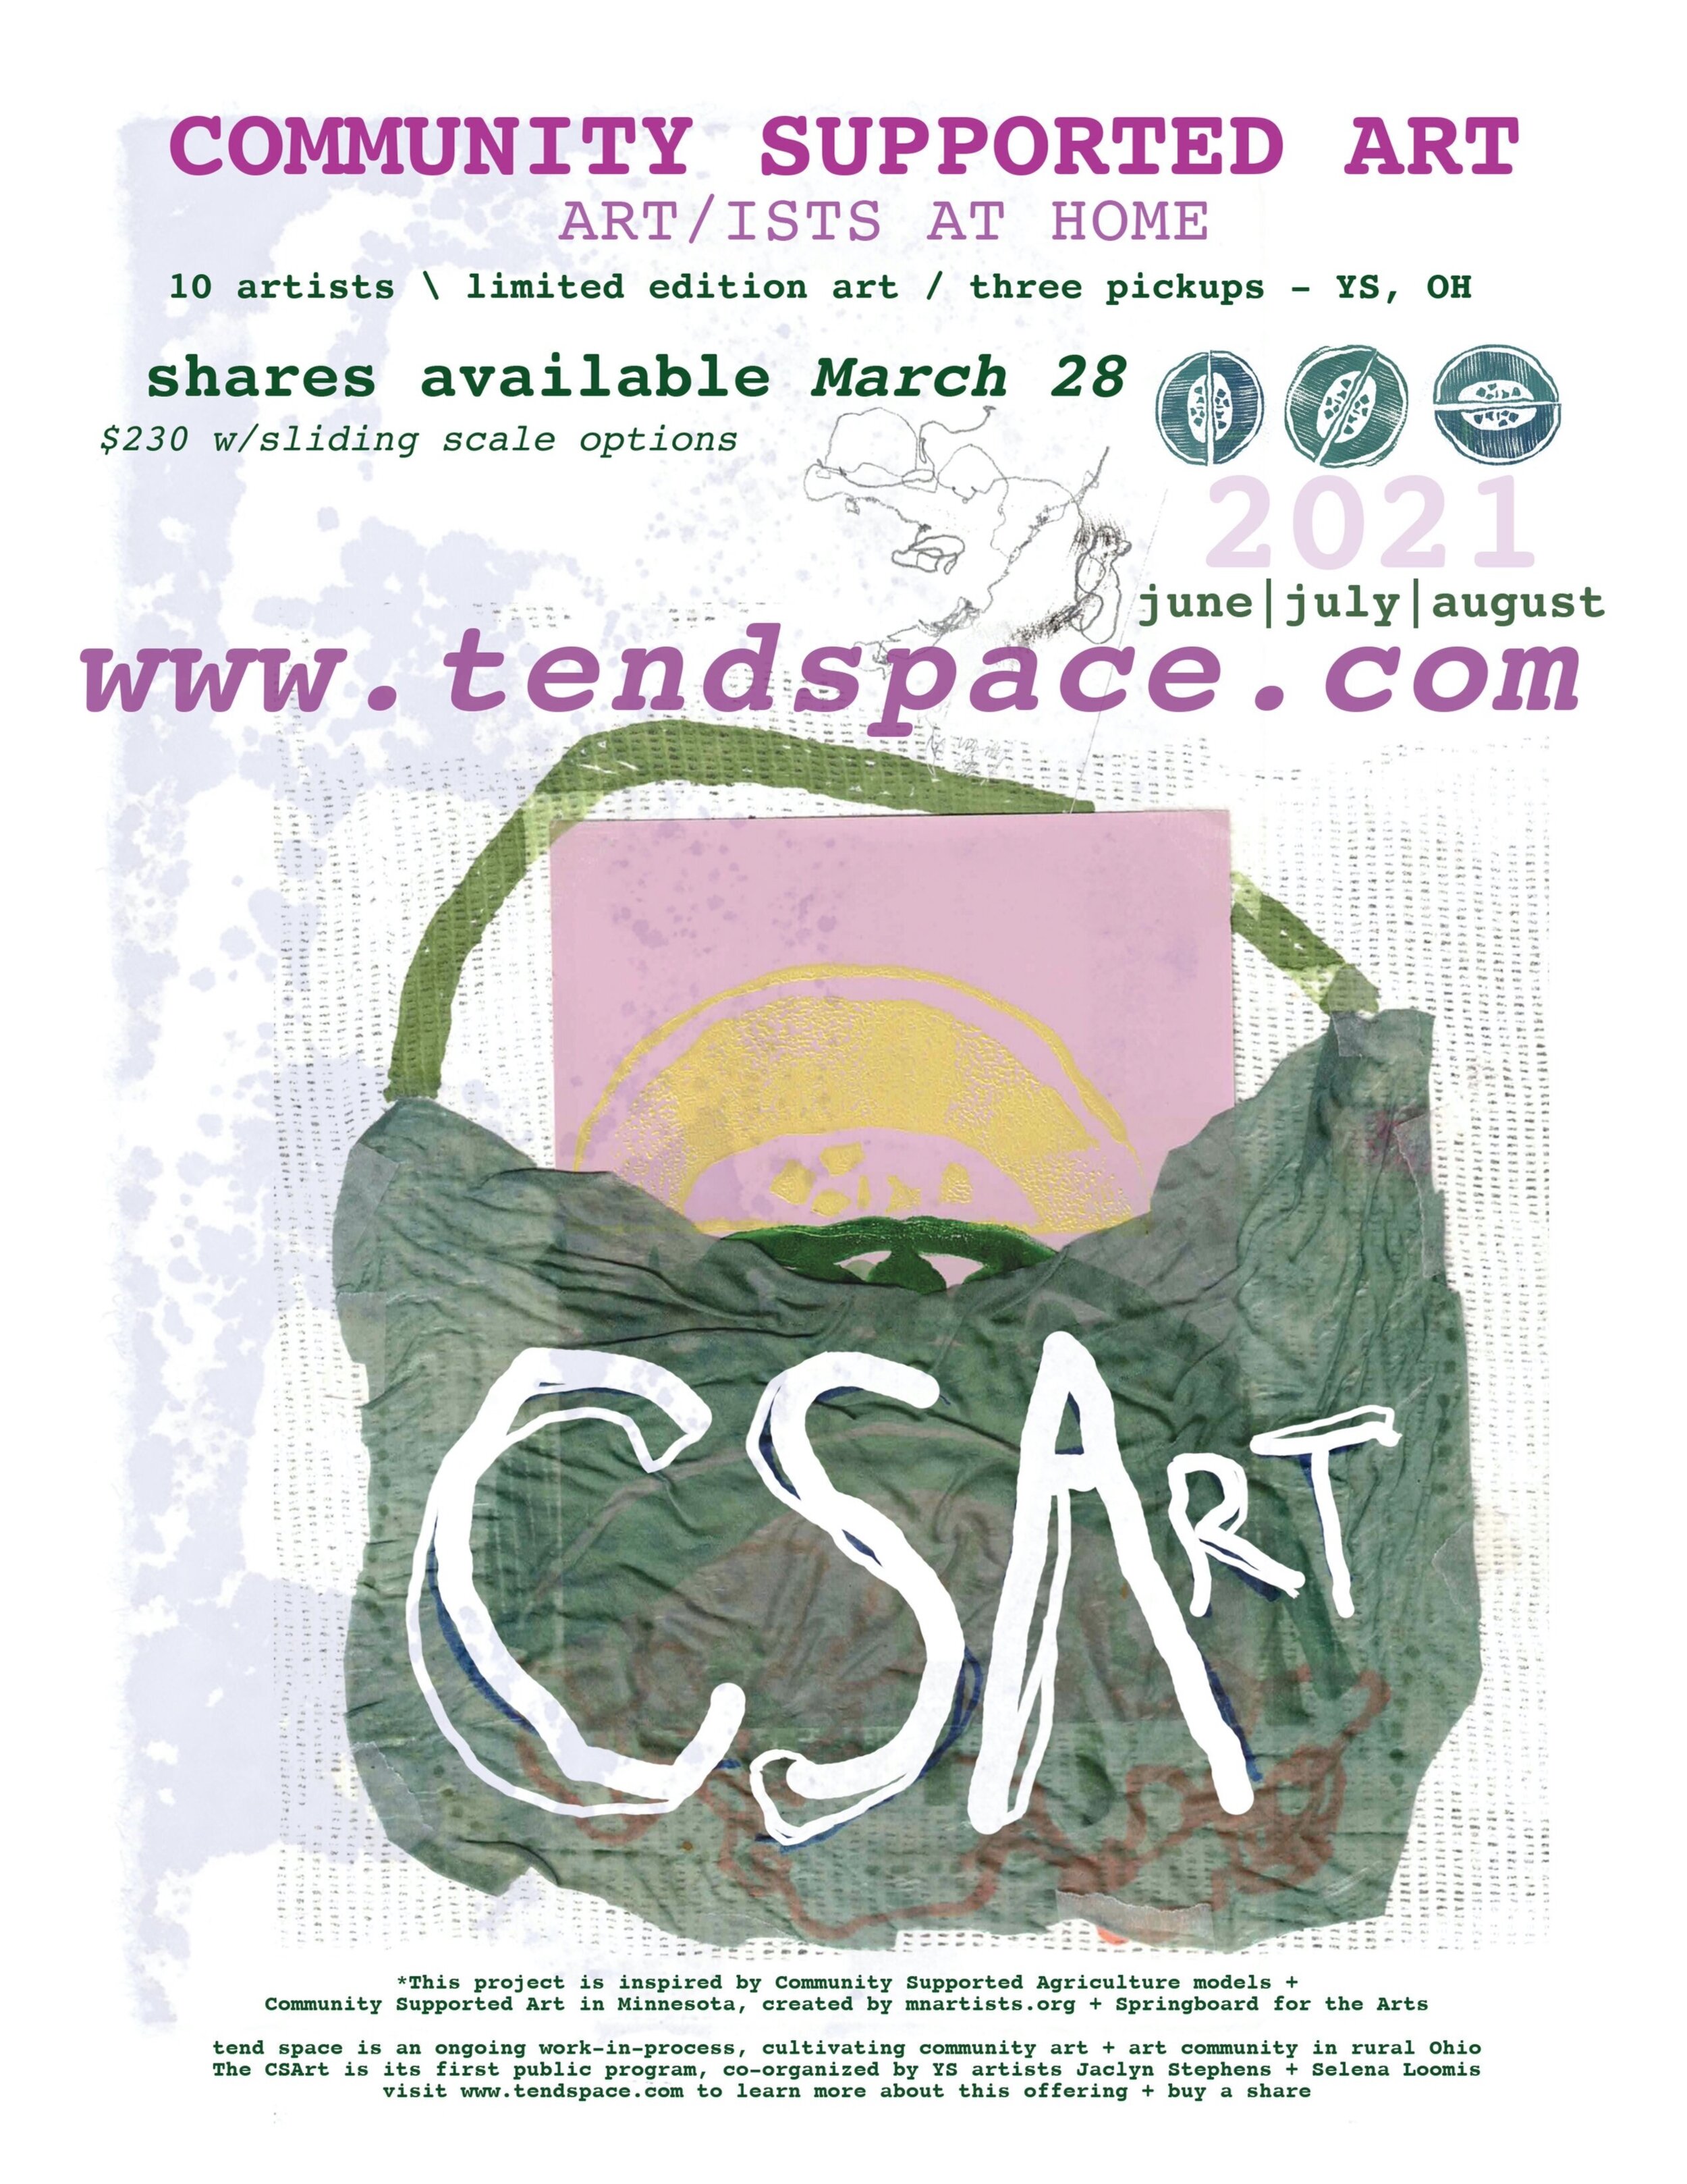 Become a share member! visit www.tendspace.com